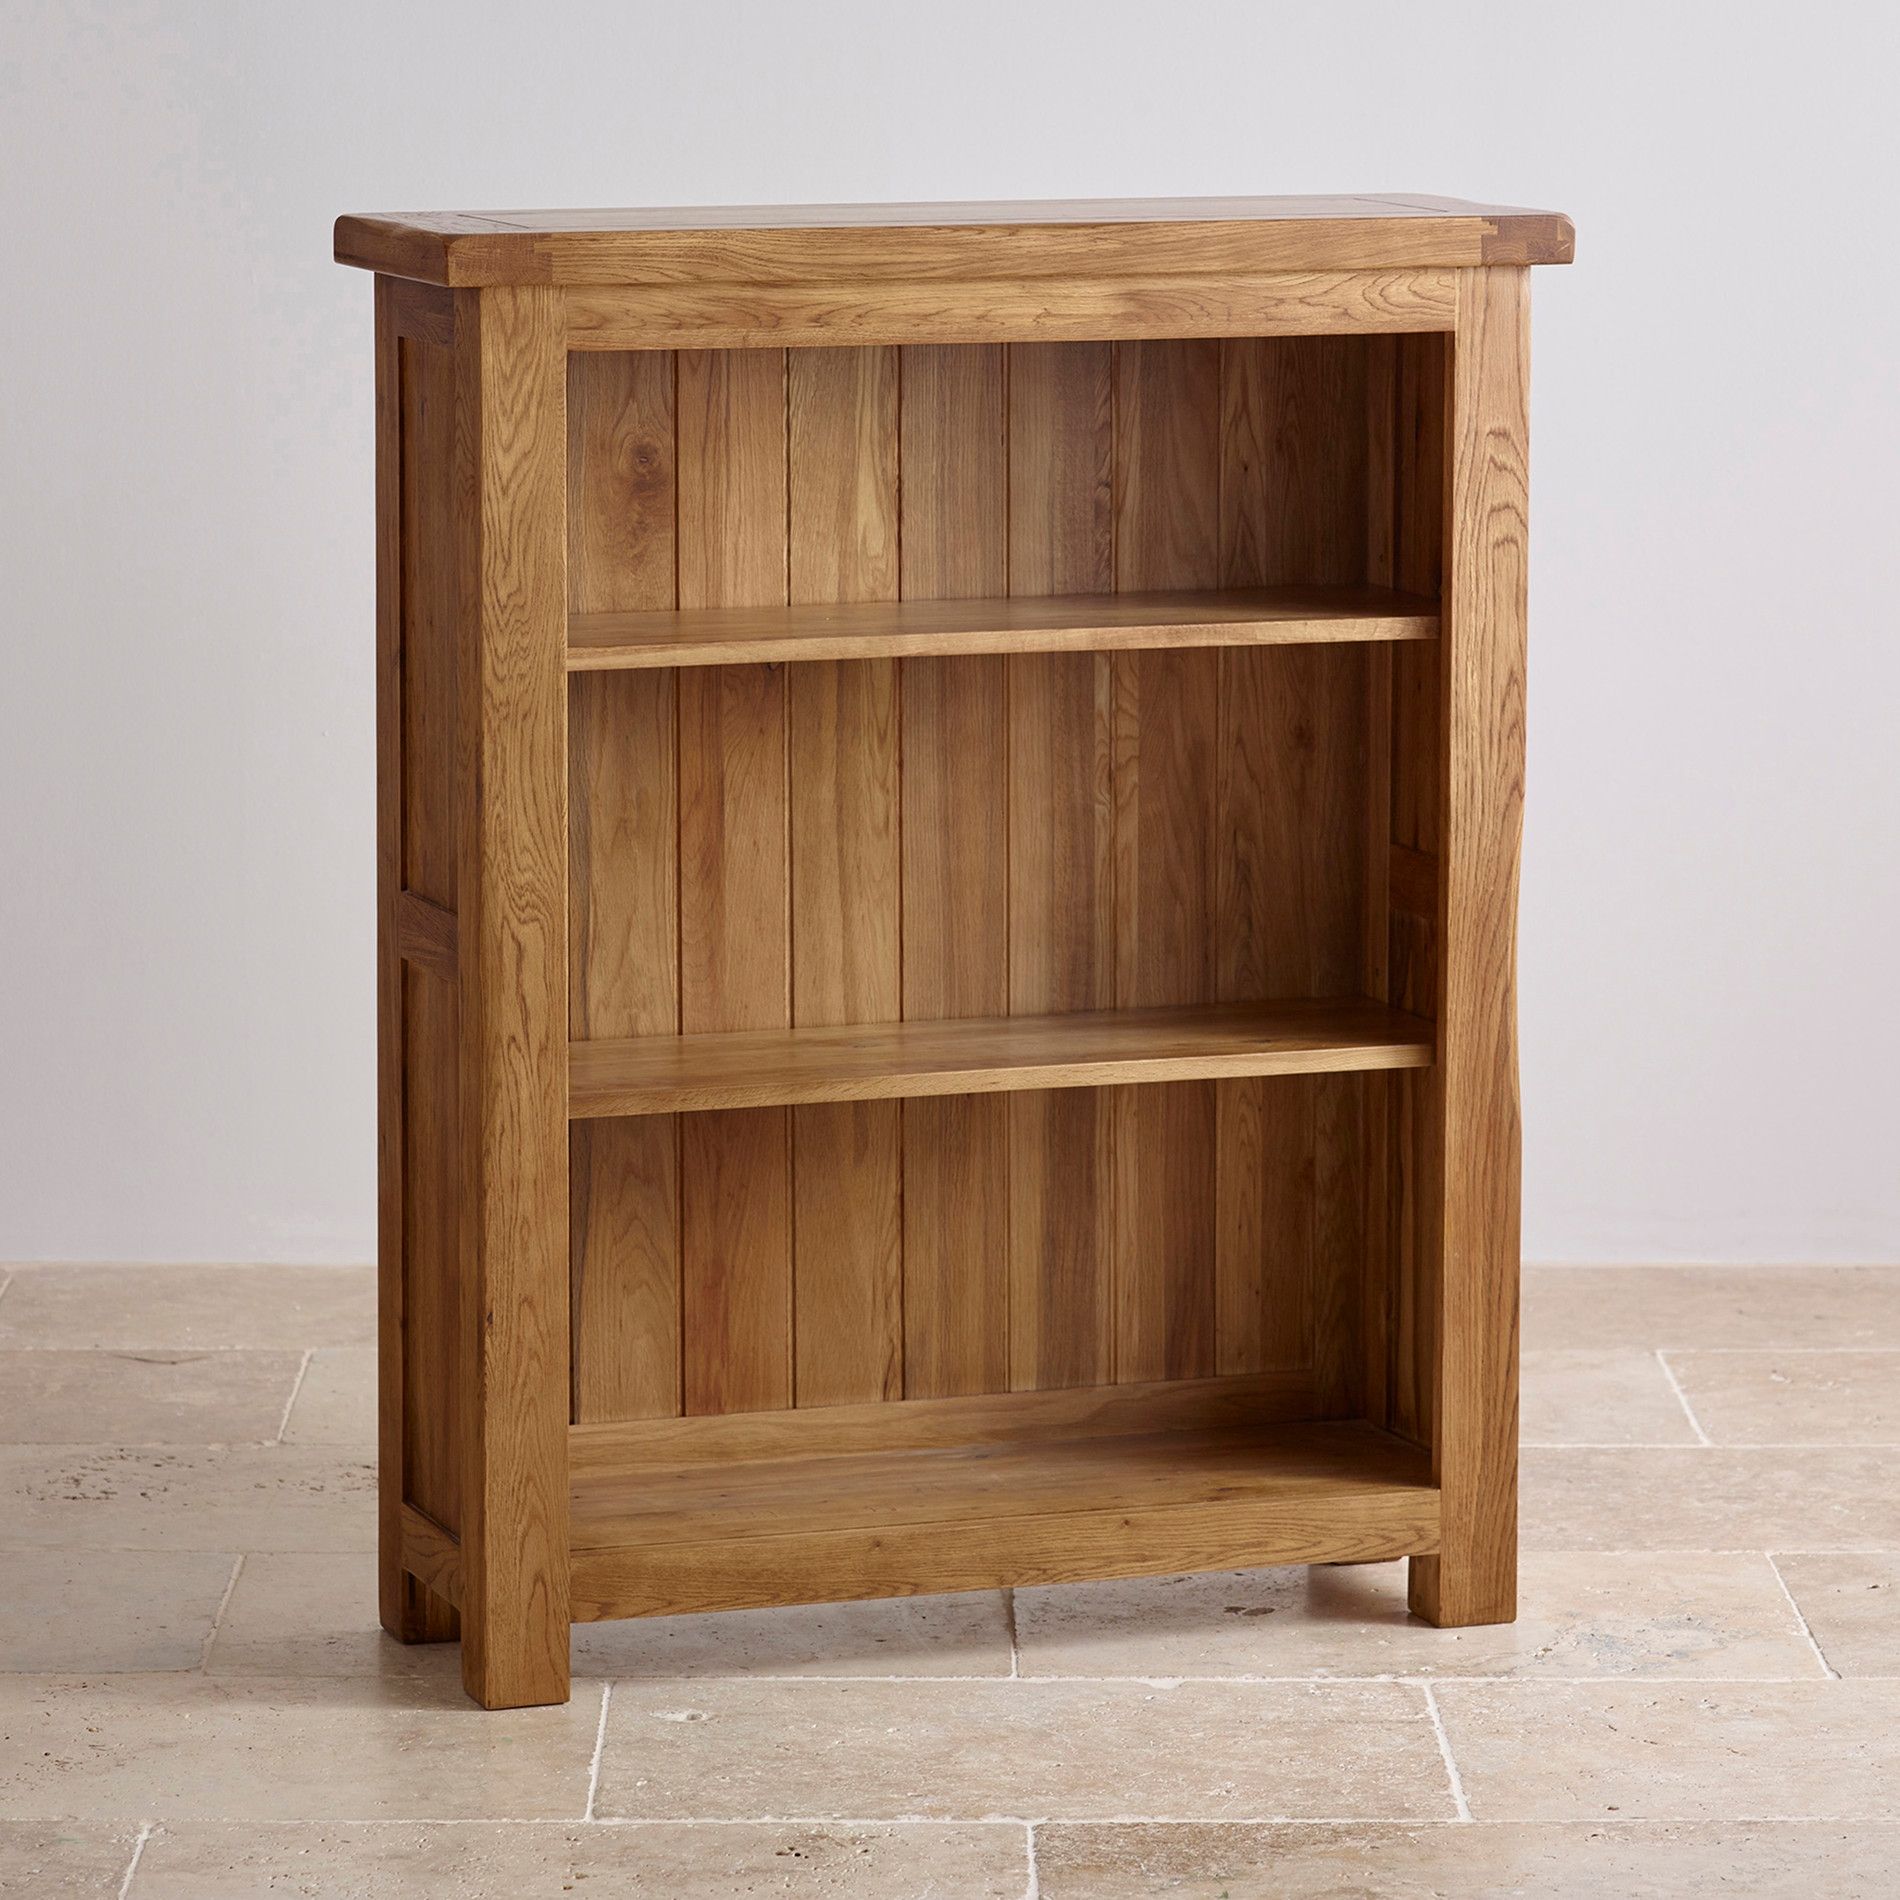 Bookcases Function And Style Oak Furniture Land Throughout Oak Bookcases (View 3 of 15)